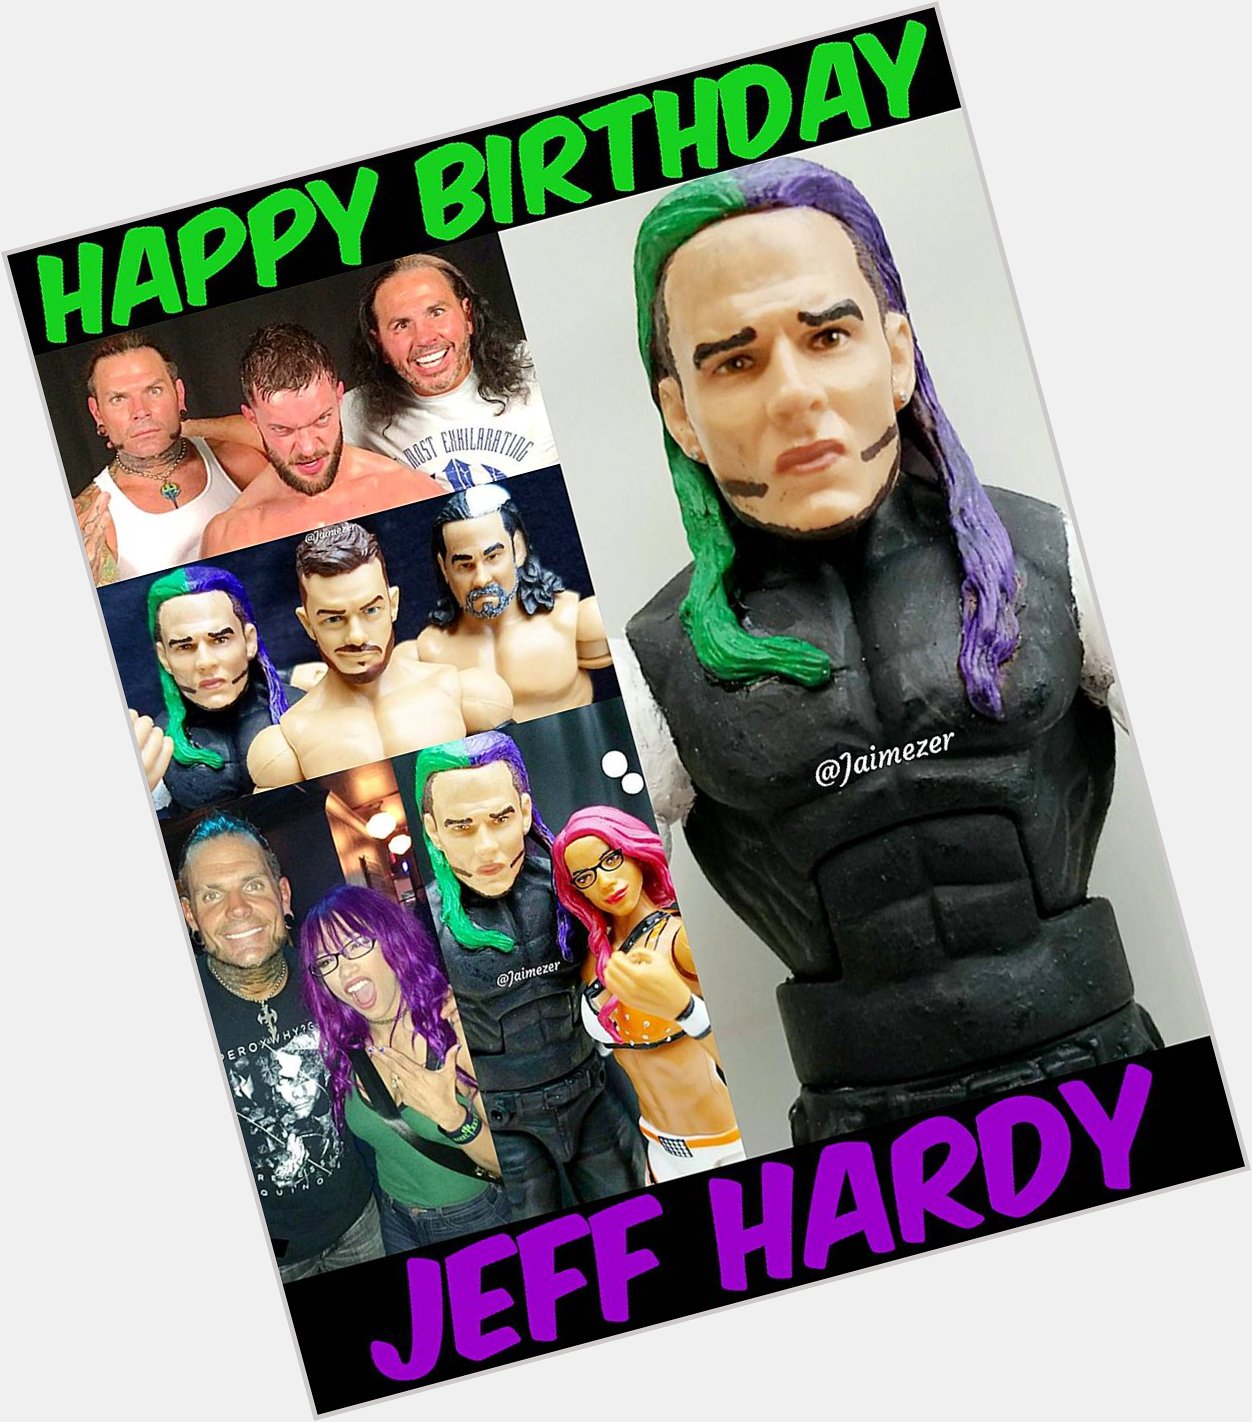 Happy Birthday to one of my all-time favorite Wrestlers, the Charismatic Enigma.. JEFF HARDY! 